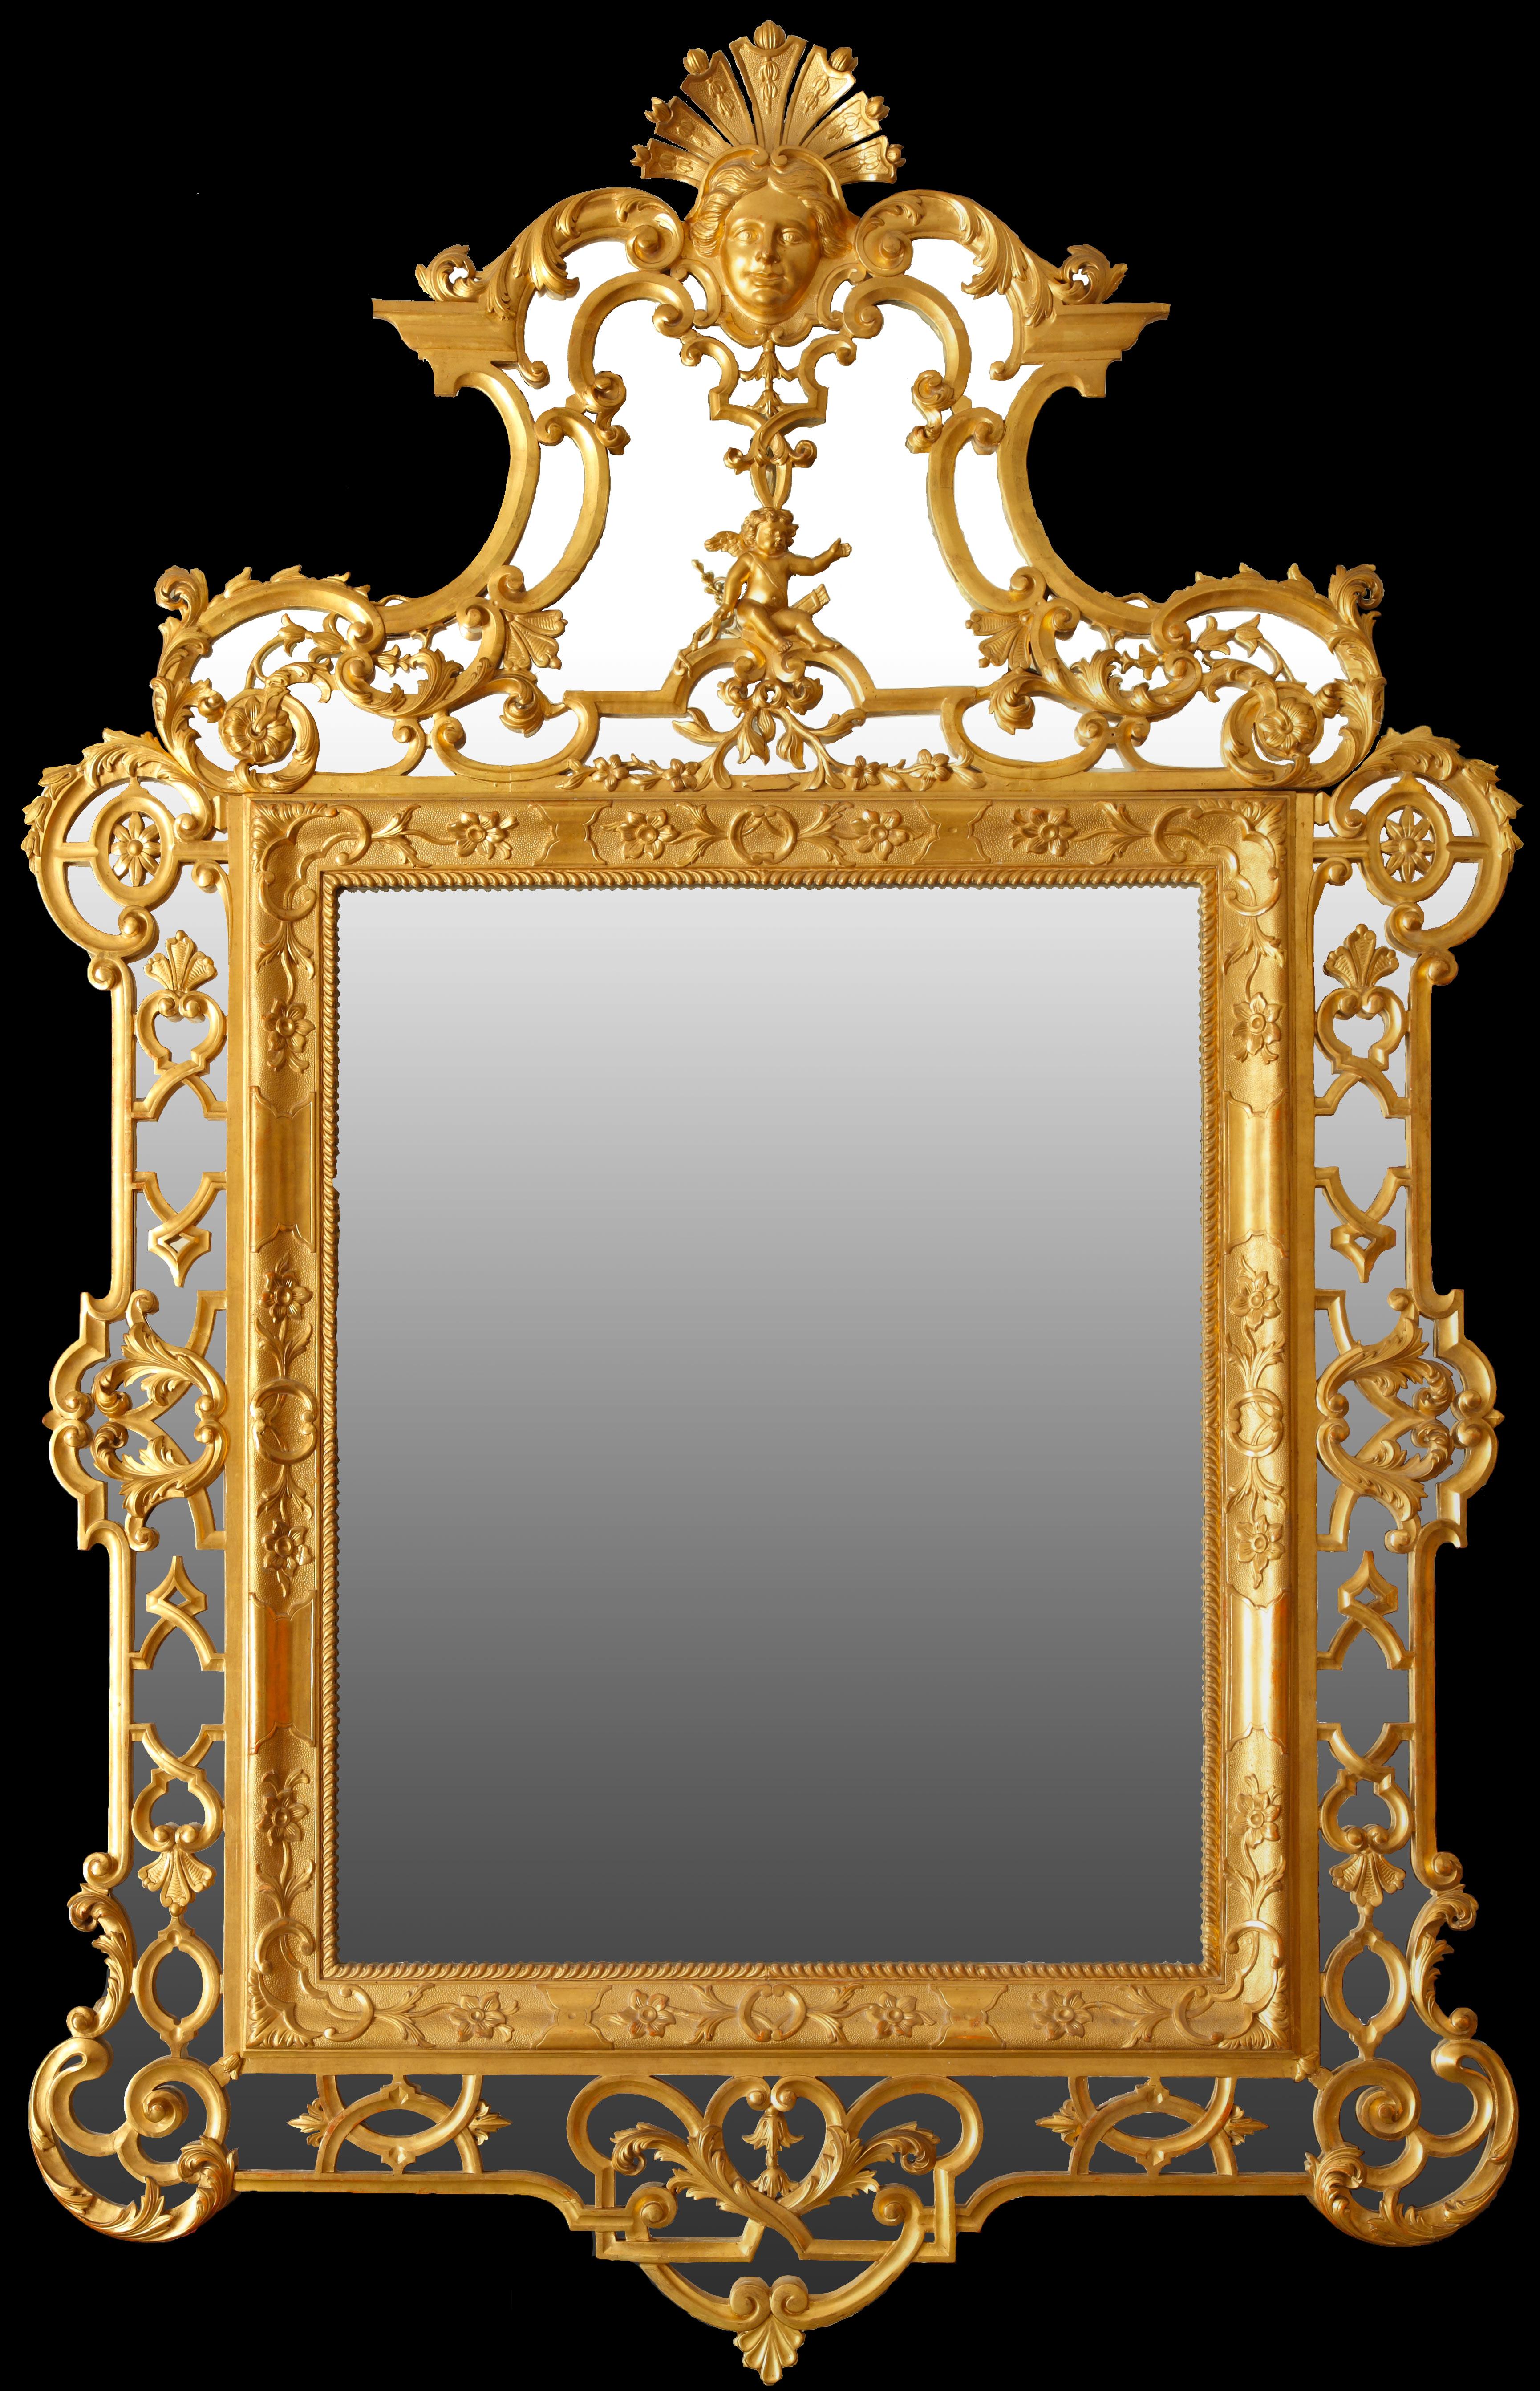 An important carved giltwood mirror with a rich frame beautifully decorated of arabesques. The top is richly ornamented with a cherub and surmounted by a mask on a spread shell. The whole profusely carved with scrolls, flowers and foliage.